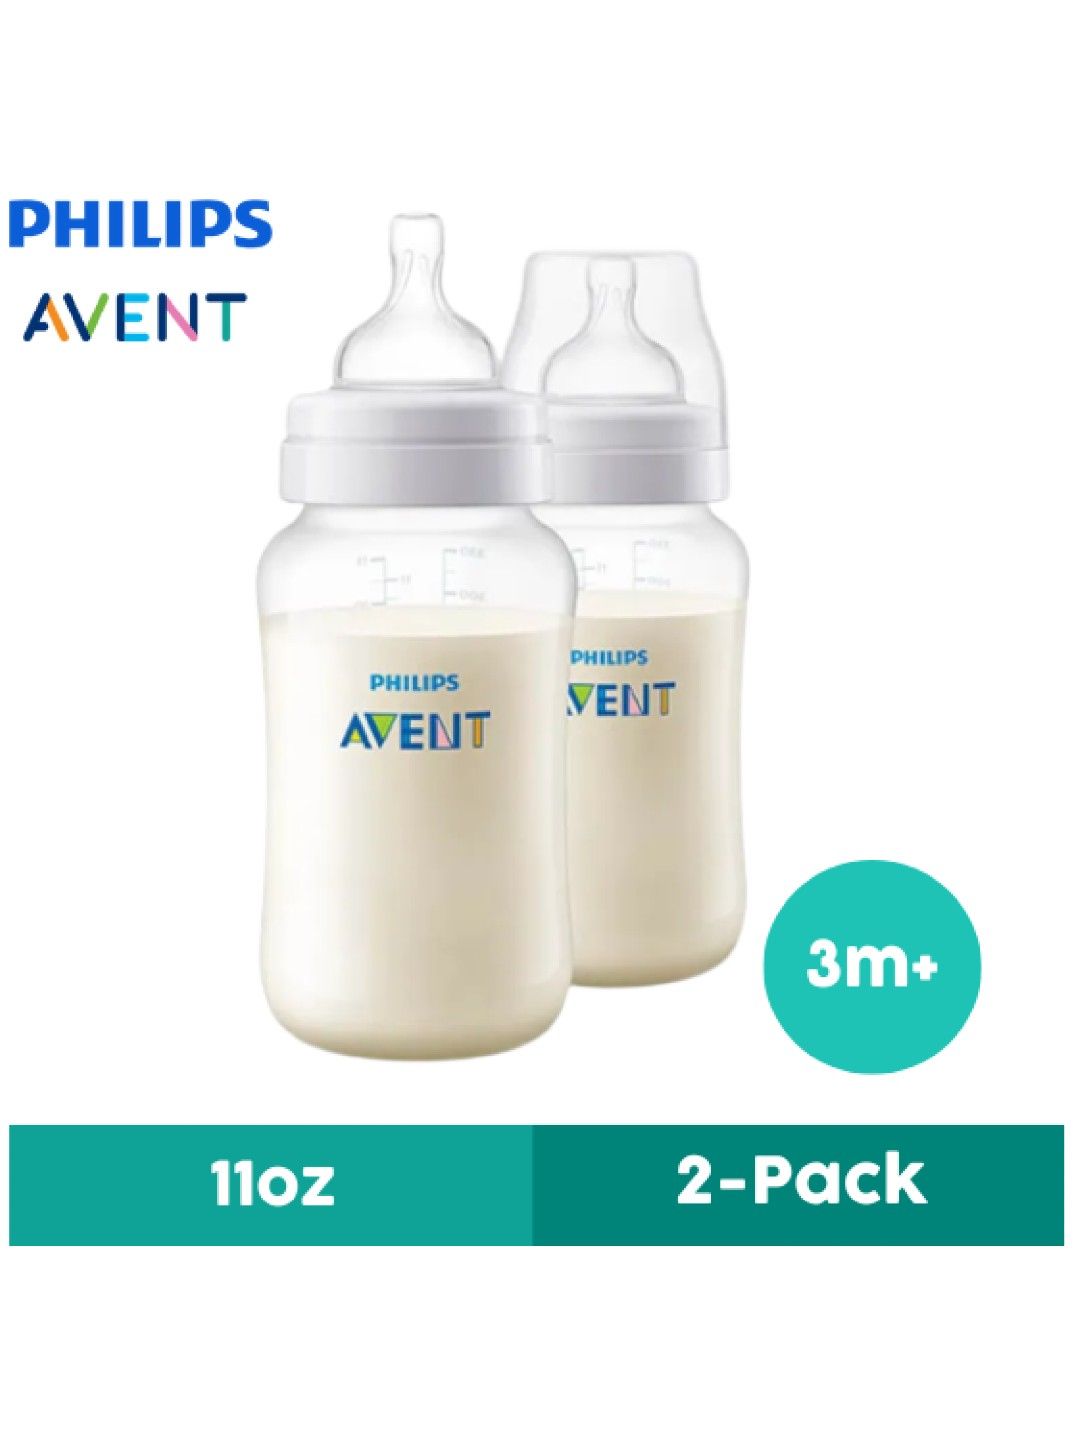 Avent Anti-colic Baby Bottle 2-pack (11oz)